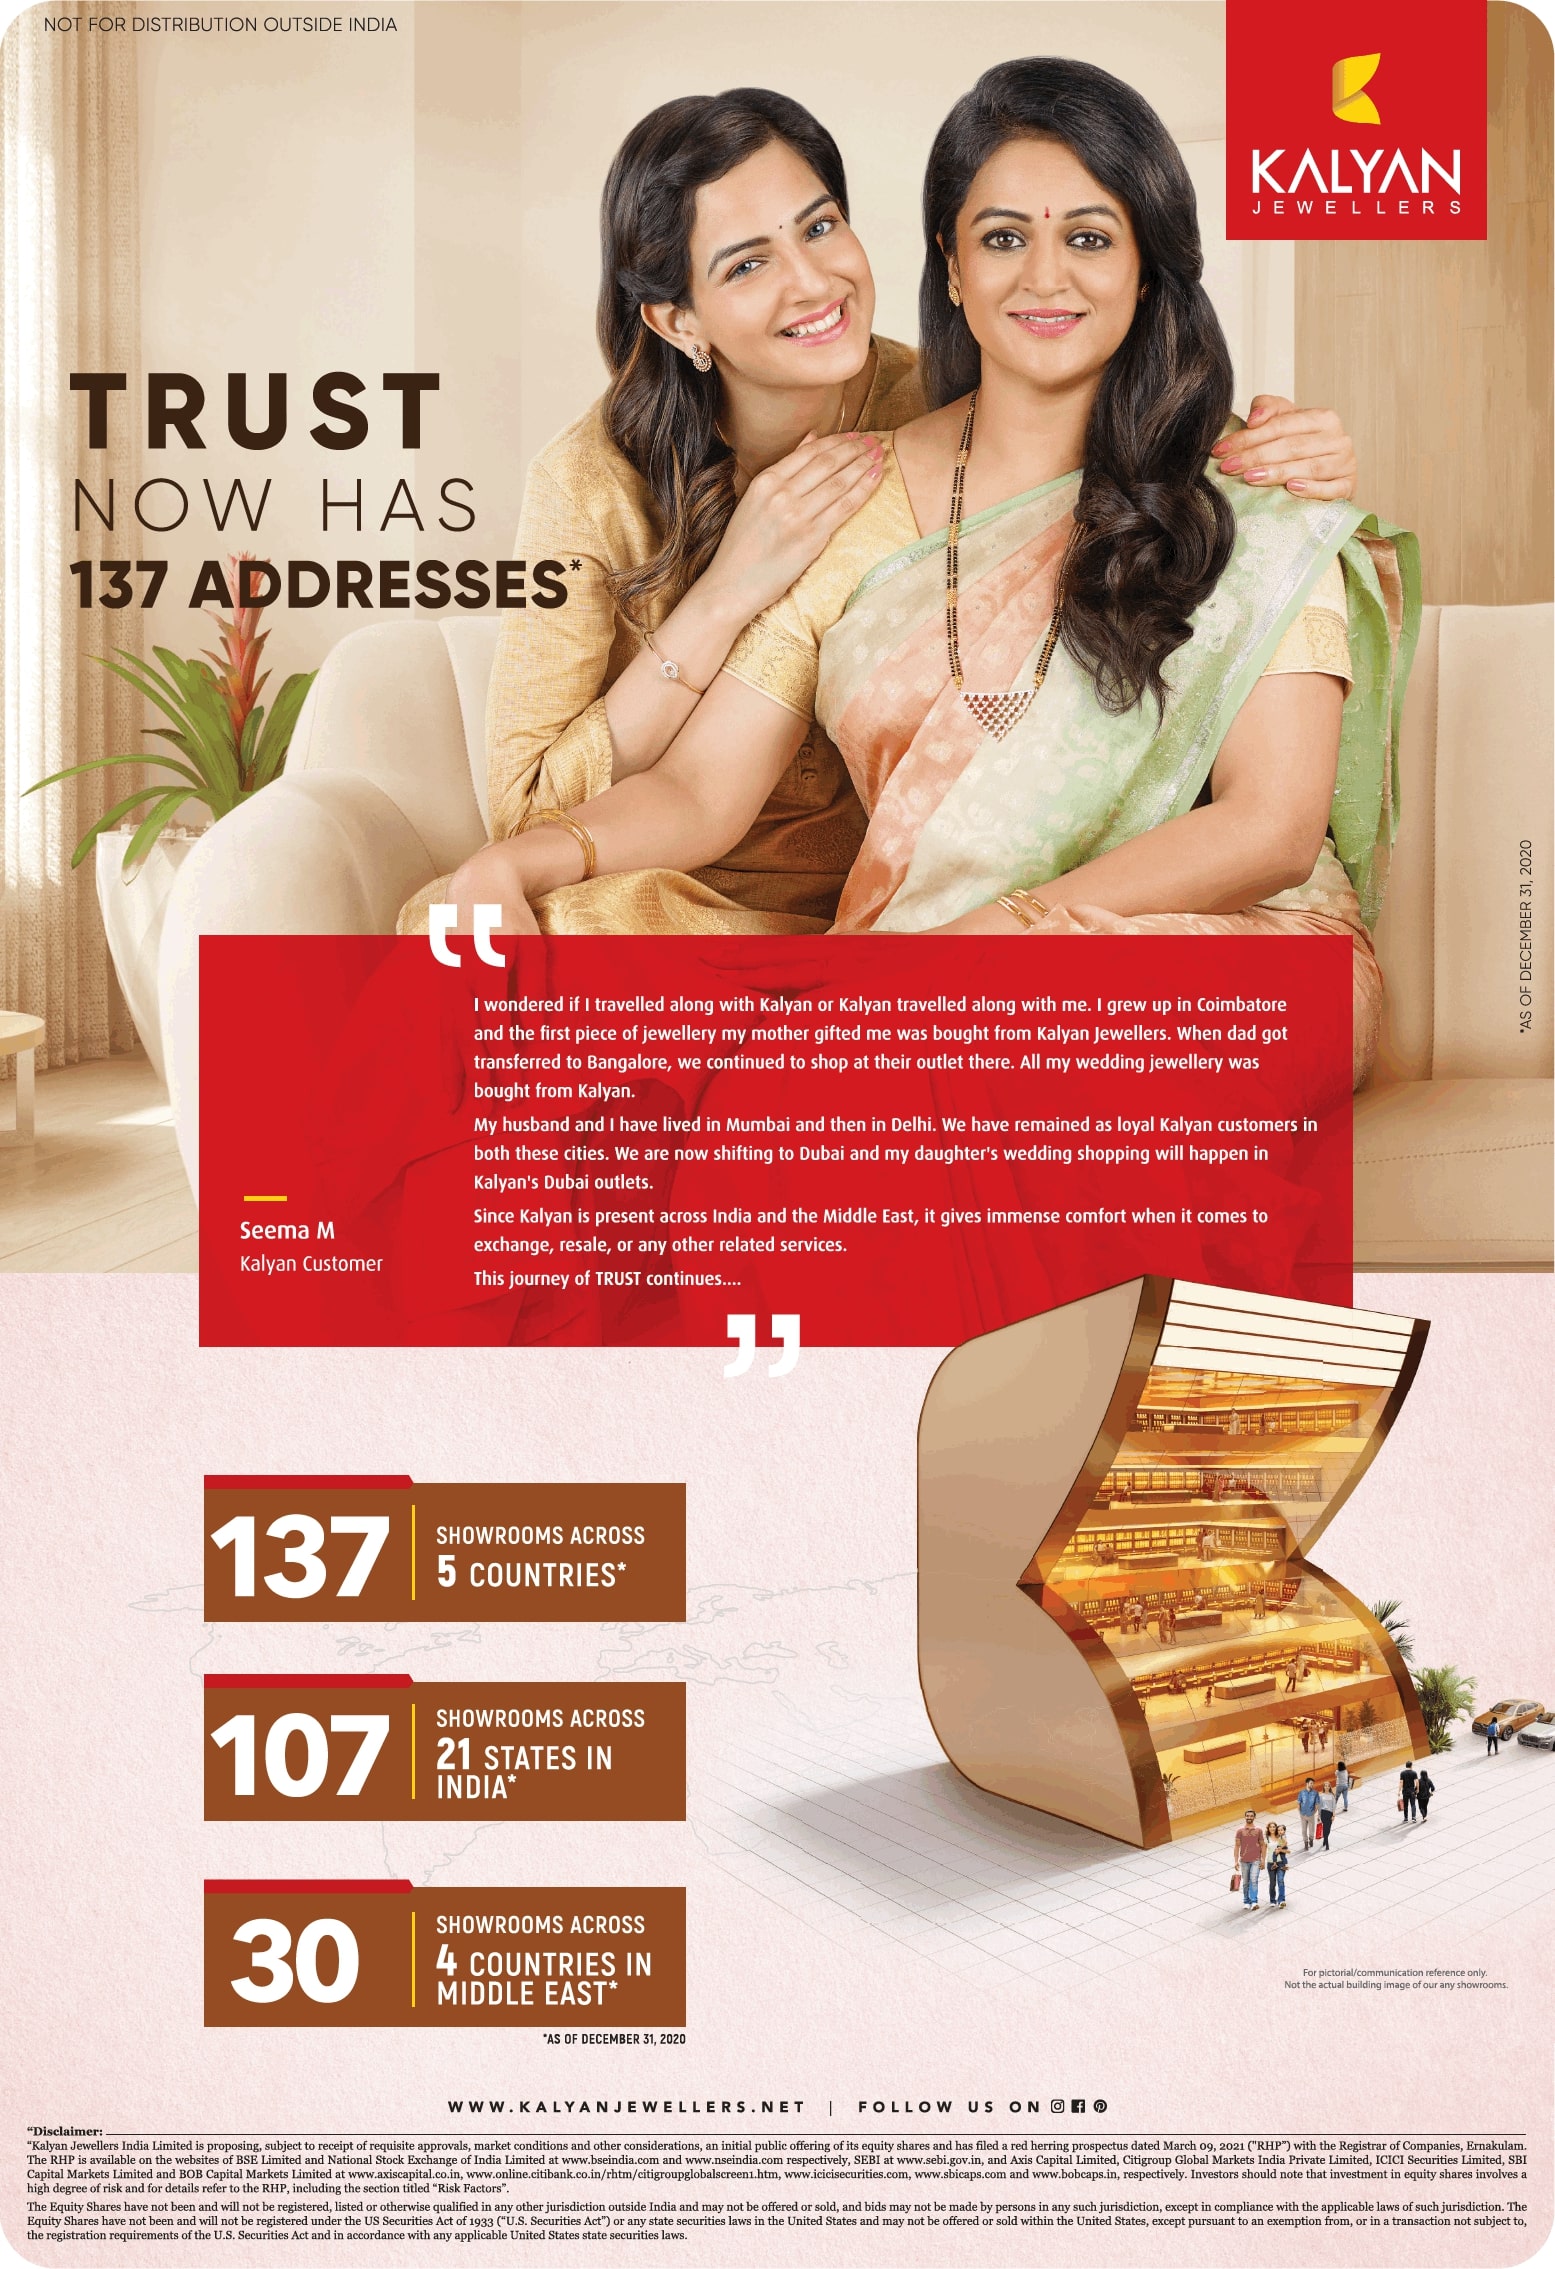 kalyan-jewellers-trust-now-has-137-addresses-ad-times-of-india-delhi-11-03-2021